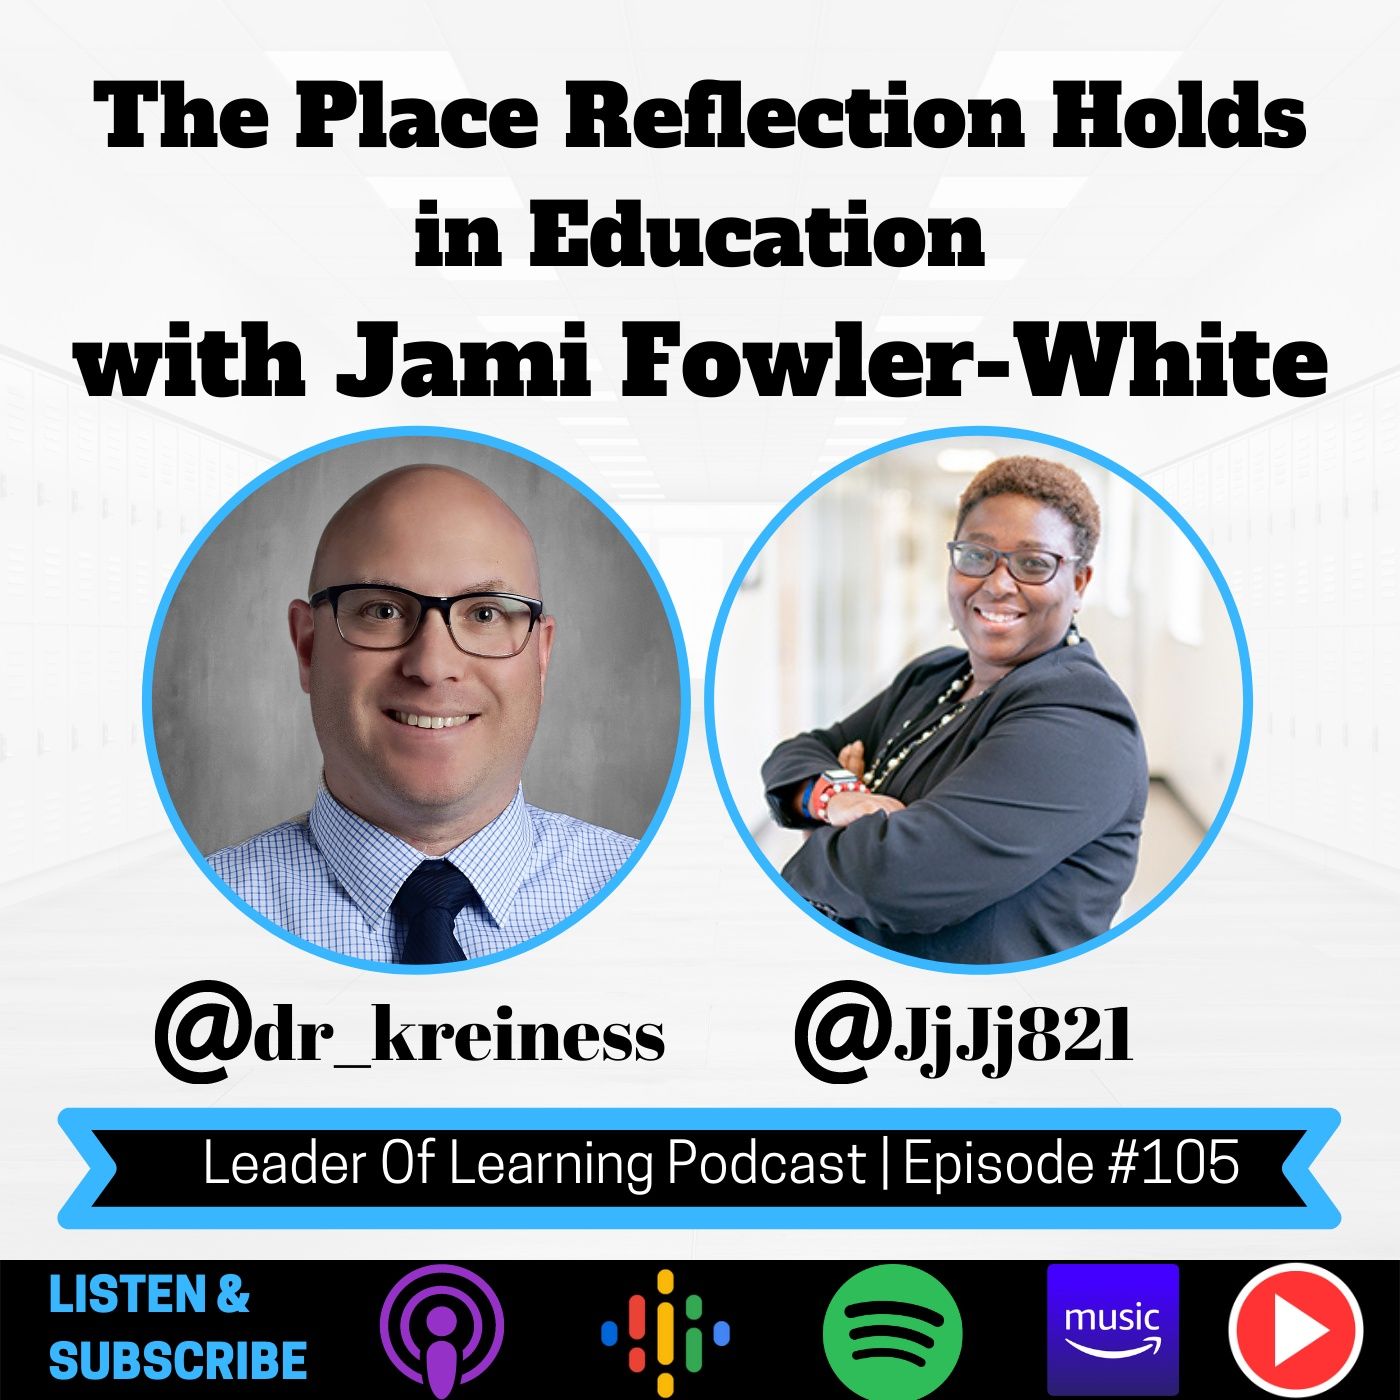 The Place Reflection Holds in Education with Jami Fowler-White Image